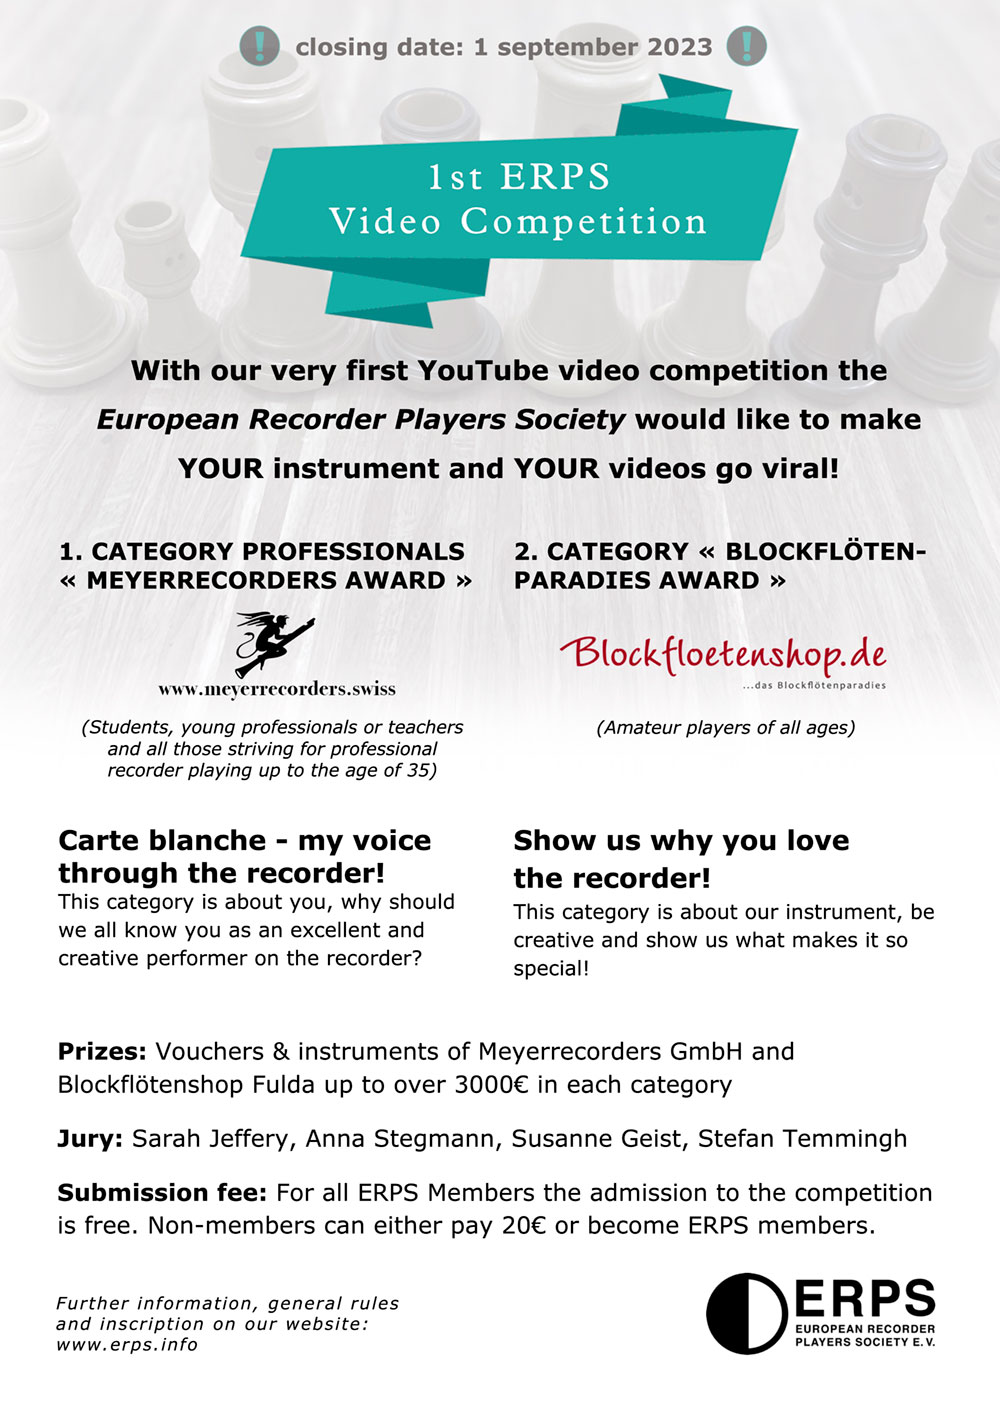 1st ERPS Video Competition